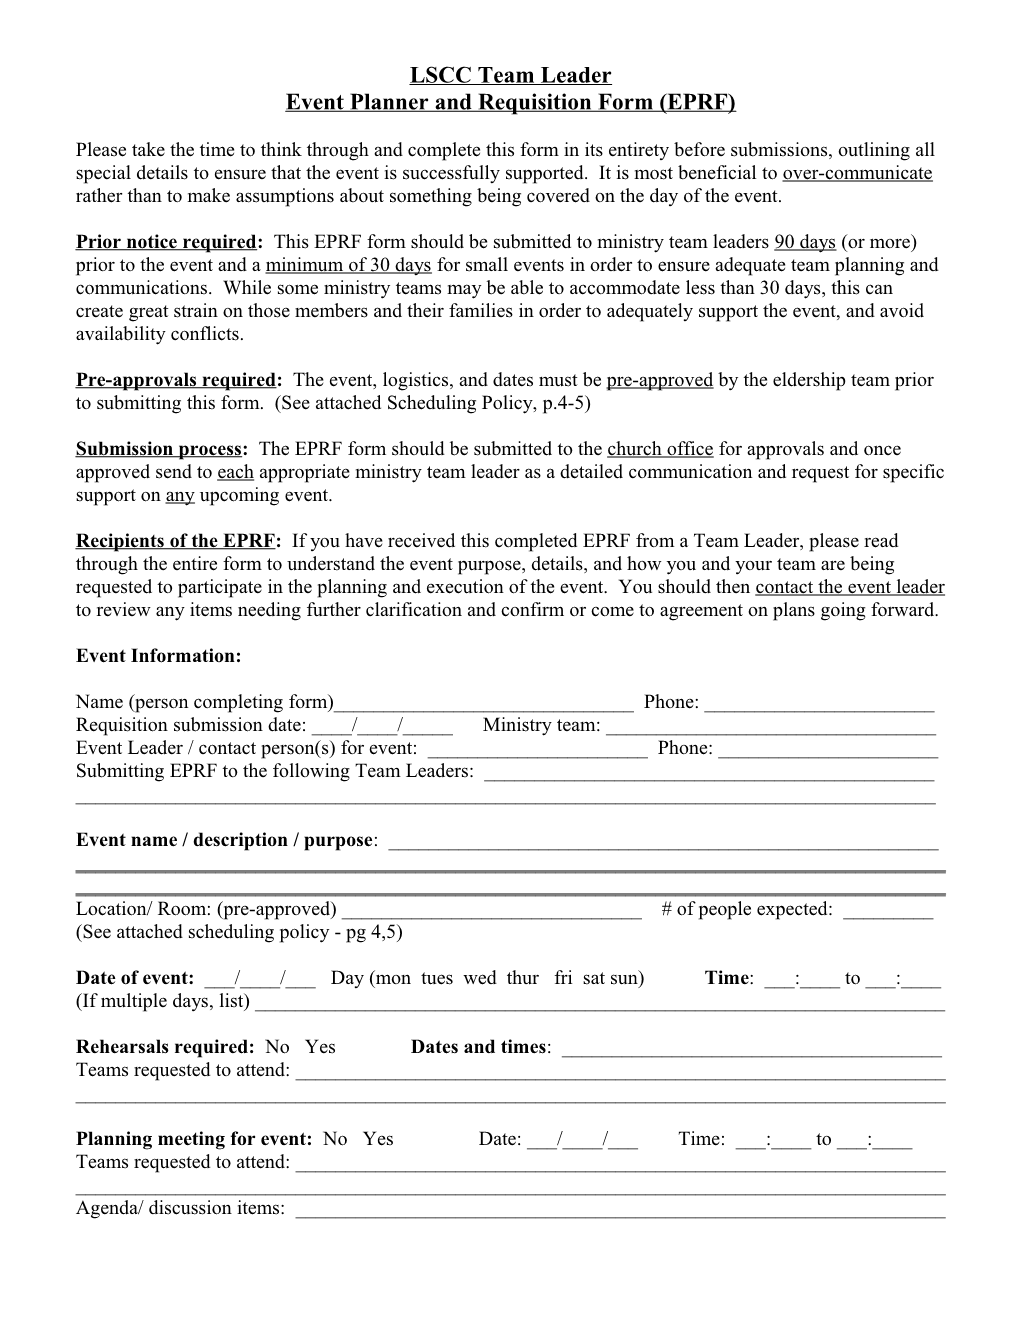 Event Requisition Form (Draft 3/10/09)